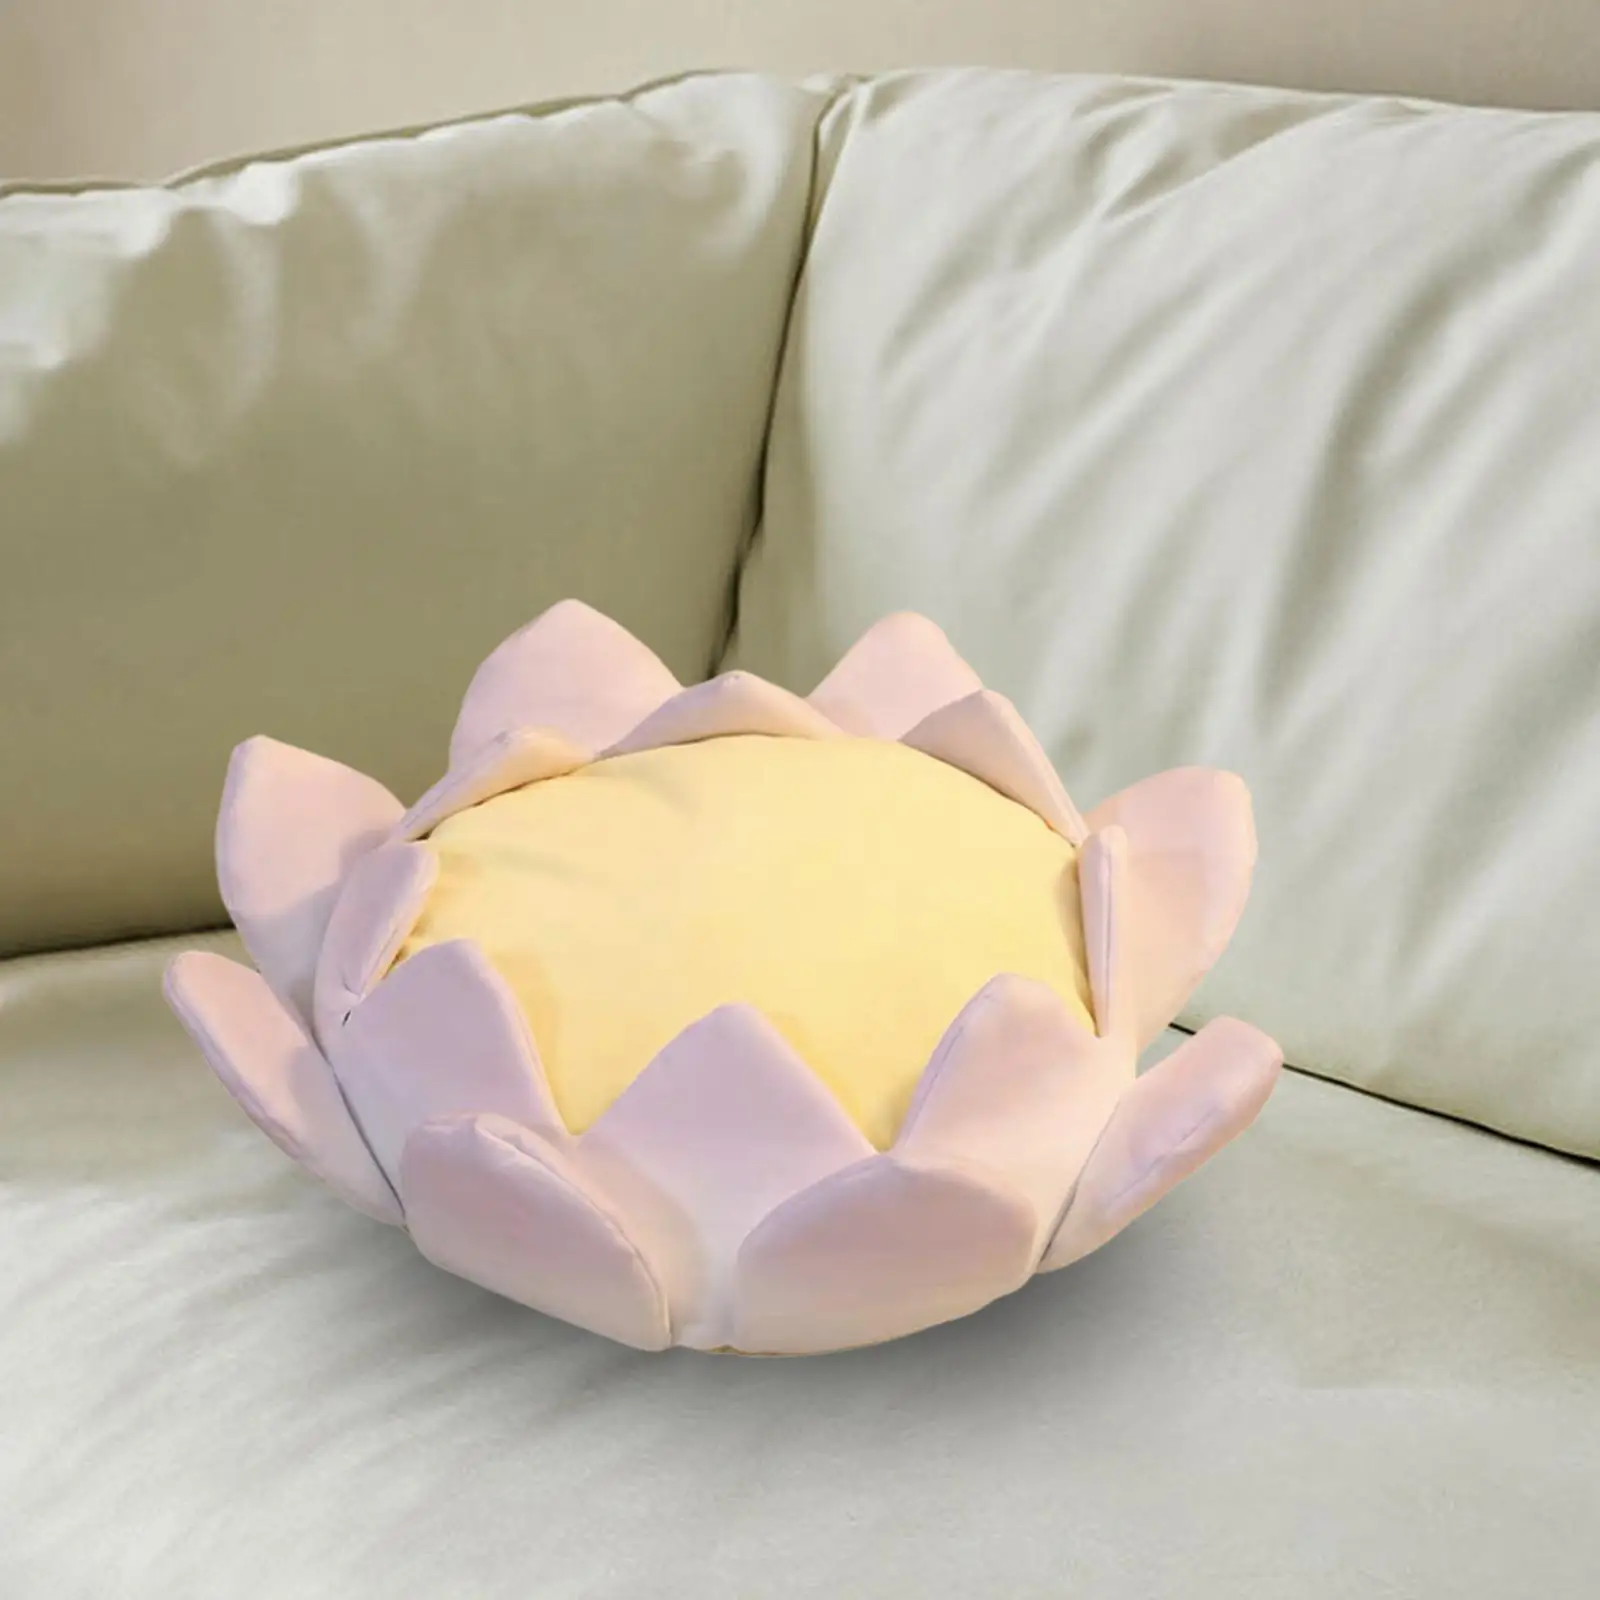 Lotus Cushion Lotus Shaped Meditation Pillow for Bedroom Yoga Couch